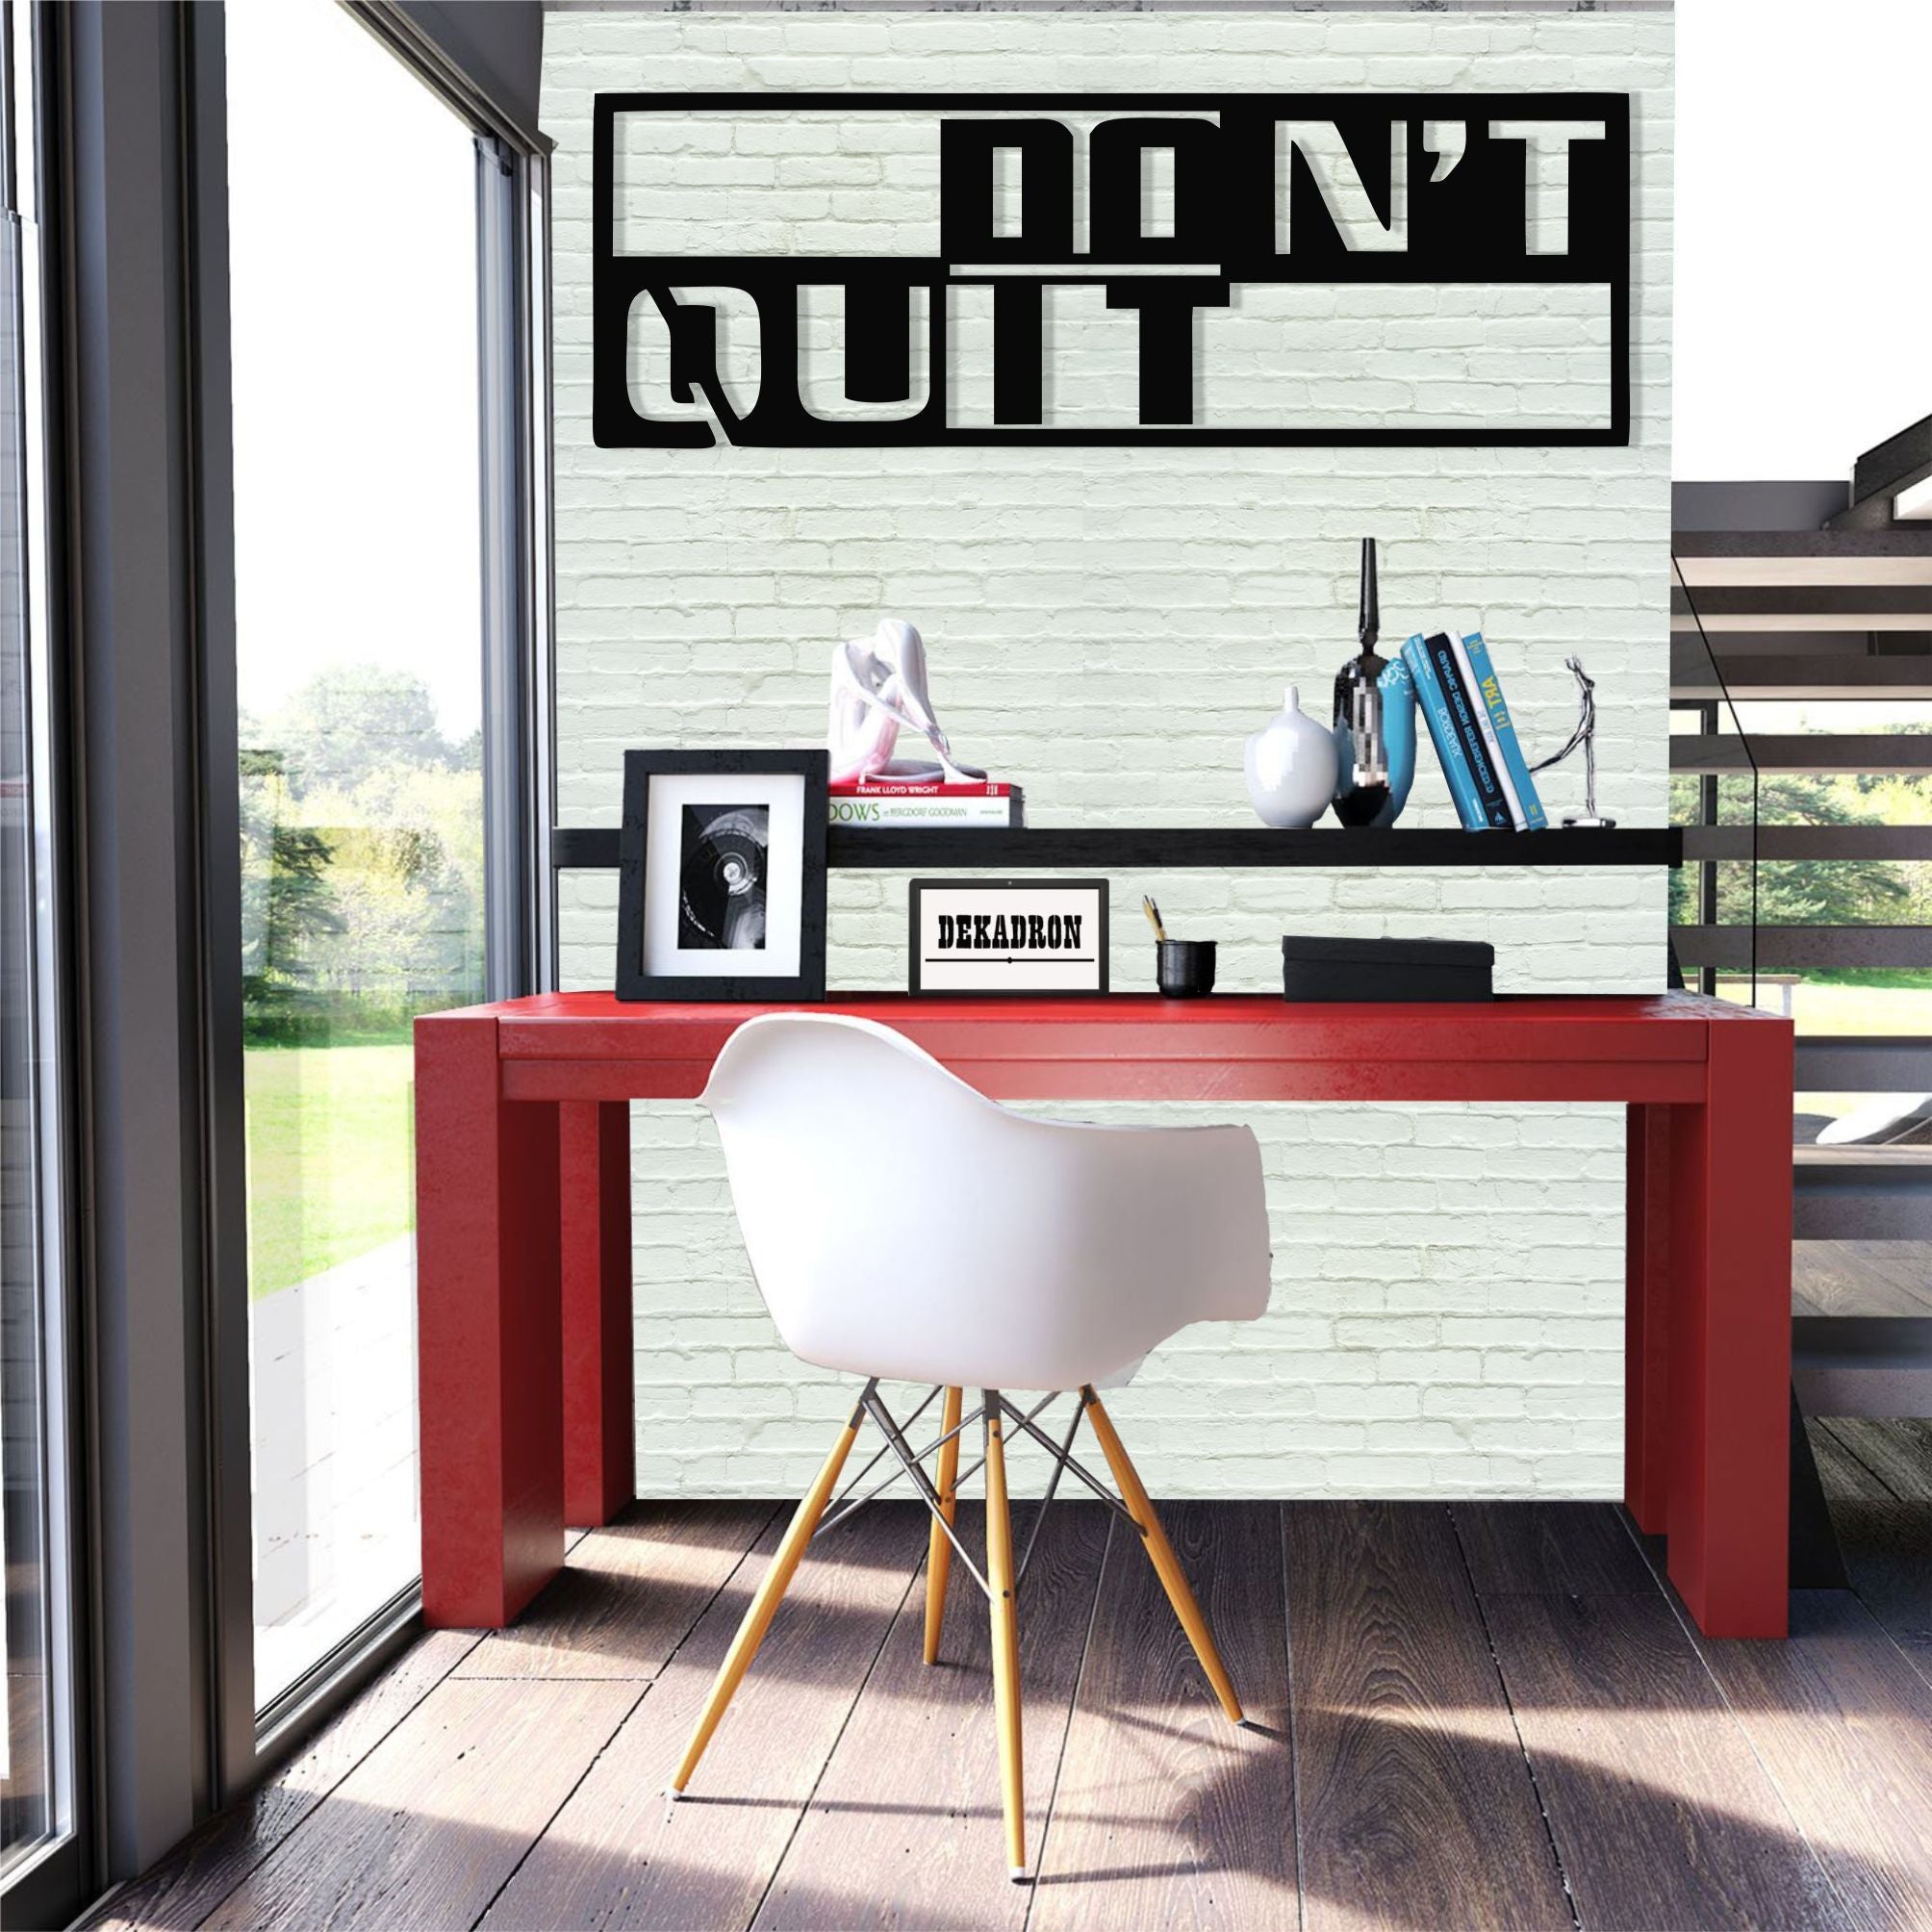 Don't Quit Metal Wall Decor